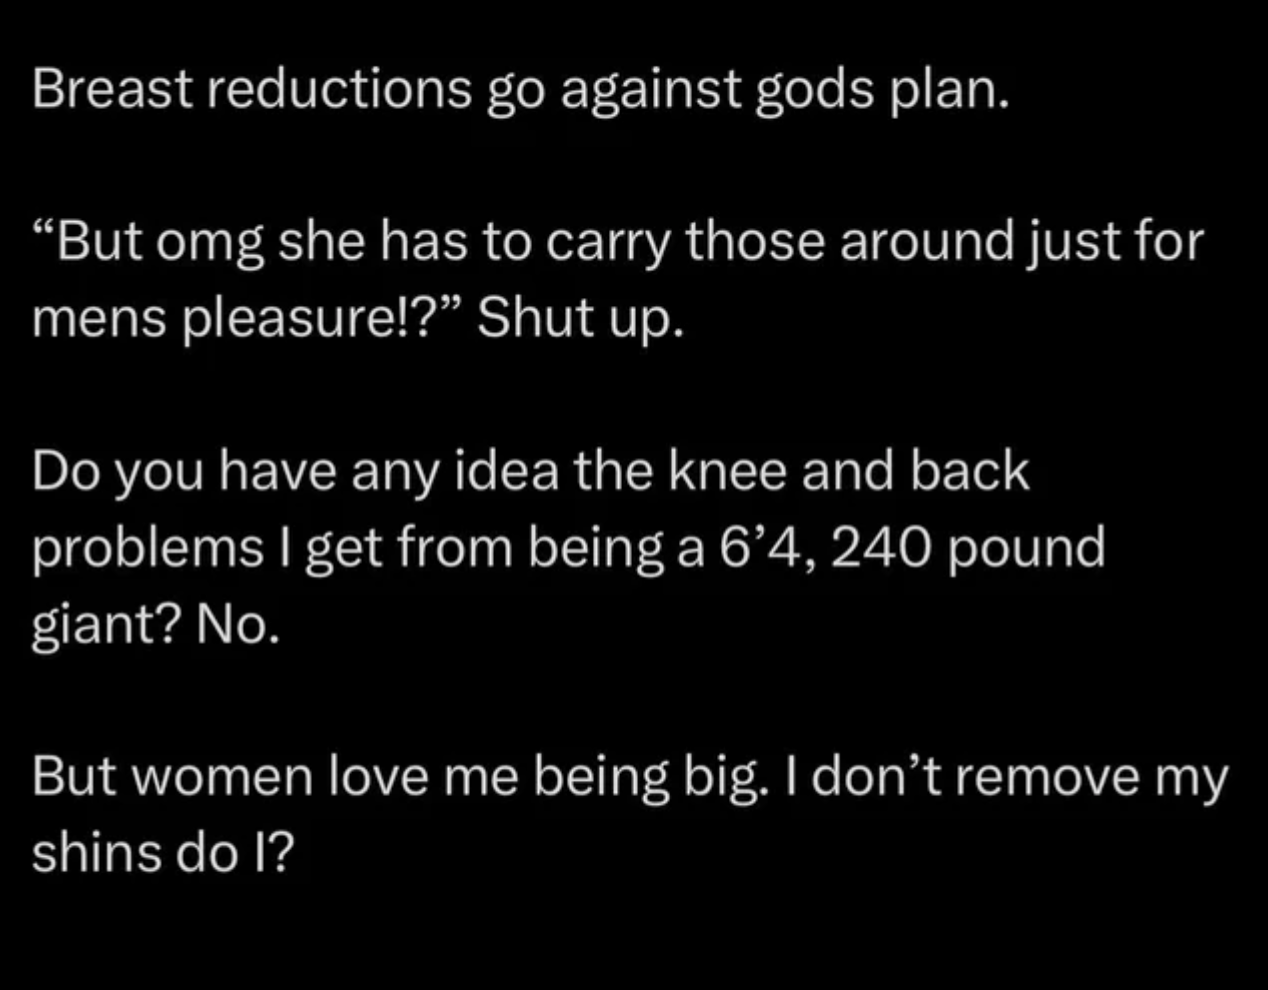 &quot;Breast reductions go against gods plan&quot;: &quot;Do you have any idea the knee and back problems I get from being a 6&#x27;4, 240 pound giant? No; but women love me being big; I don&#x27;t remove my shins do I?&quot;